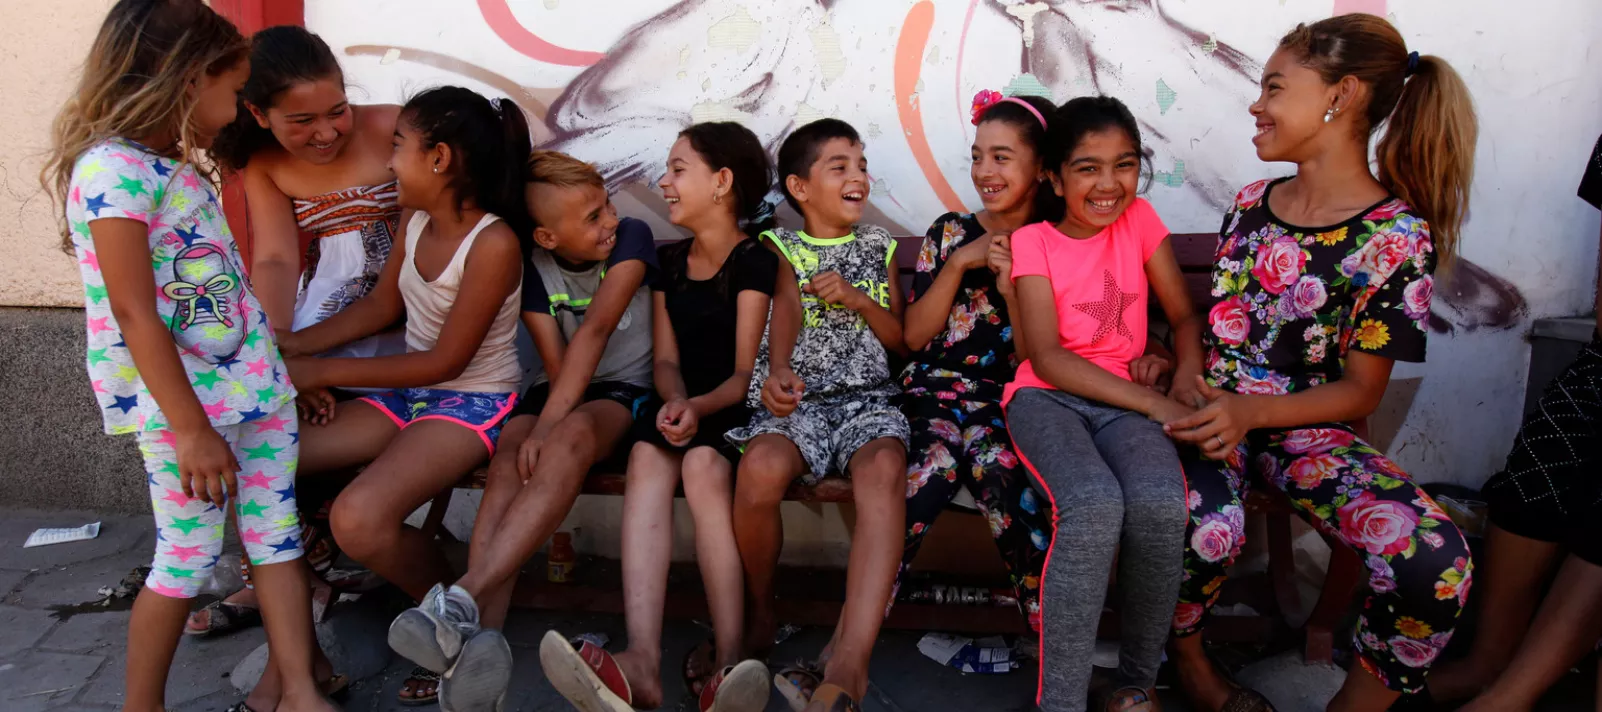 Children from vulnerable communities are sitting on a bench and having fun, behind them there are beautiful graffiti